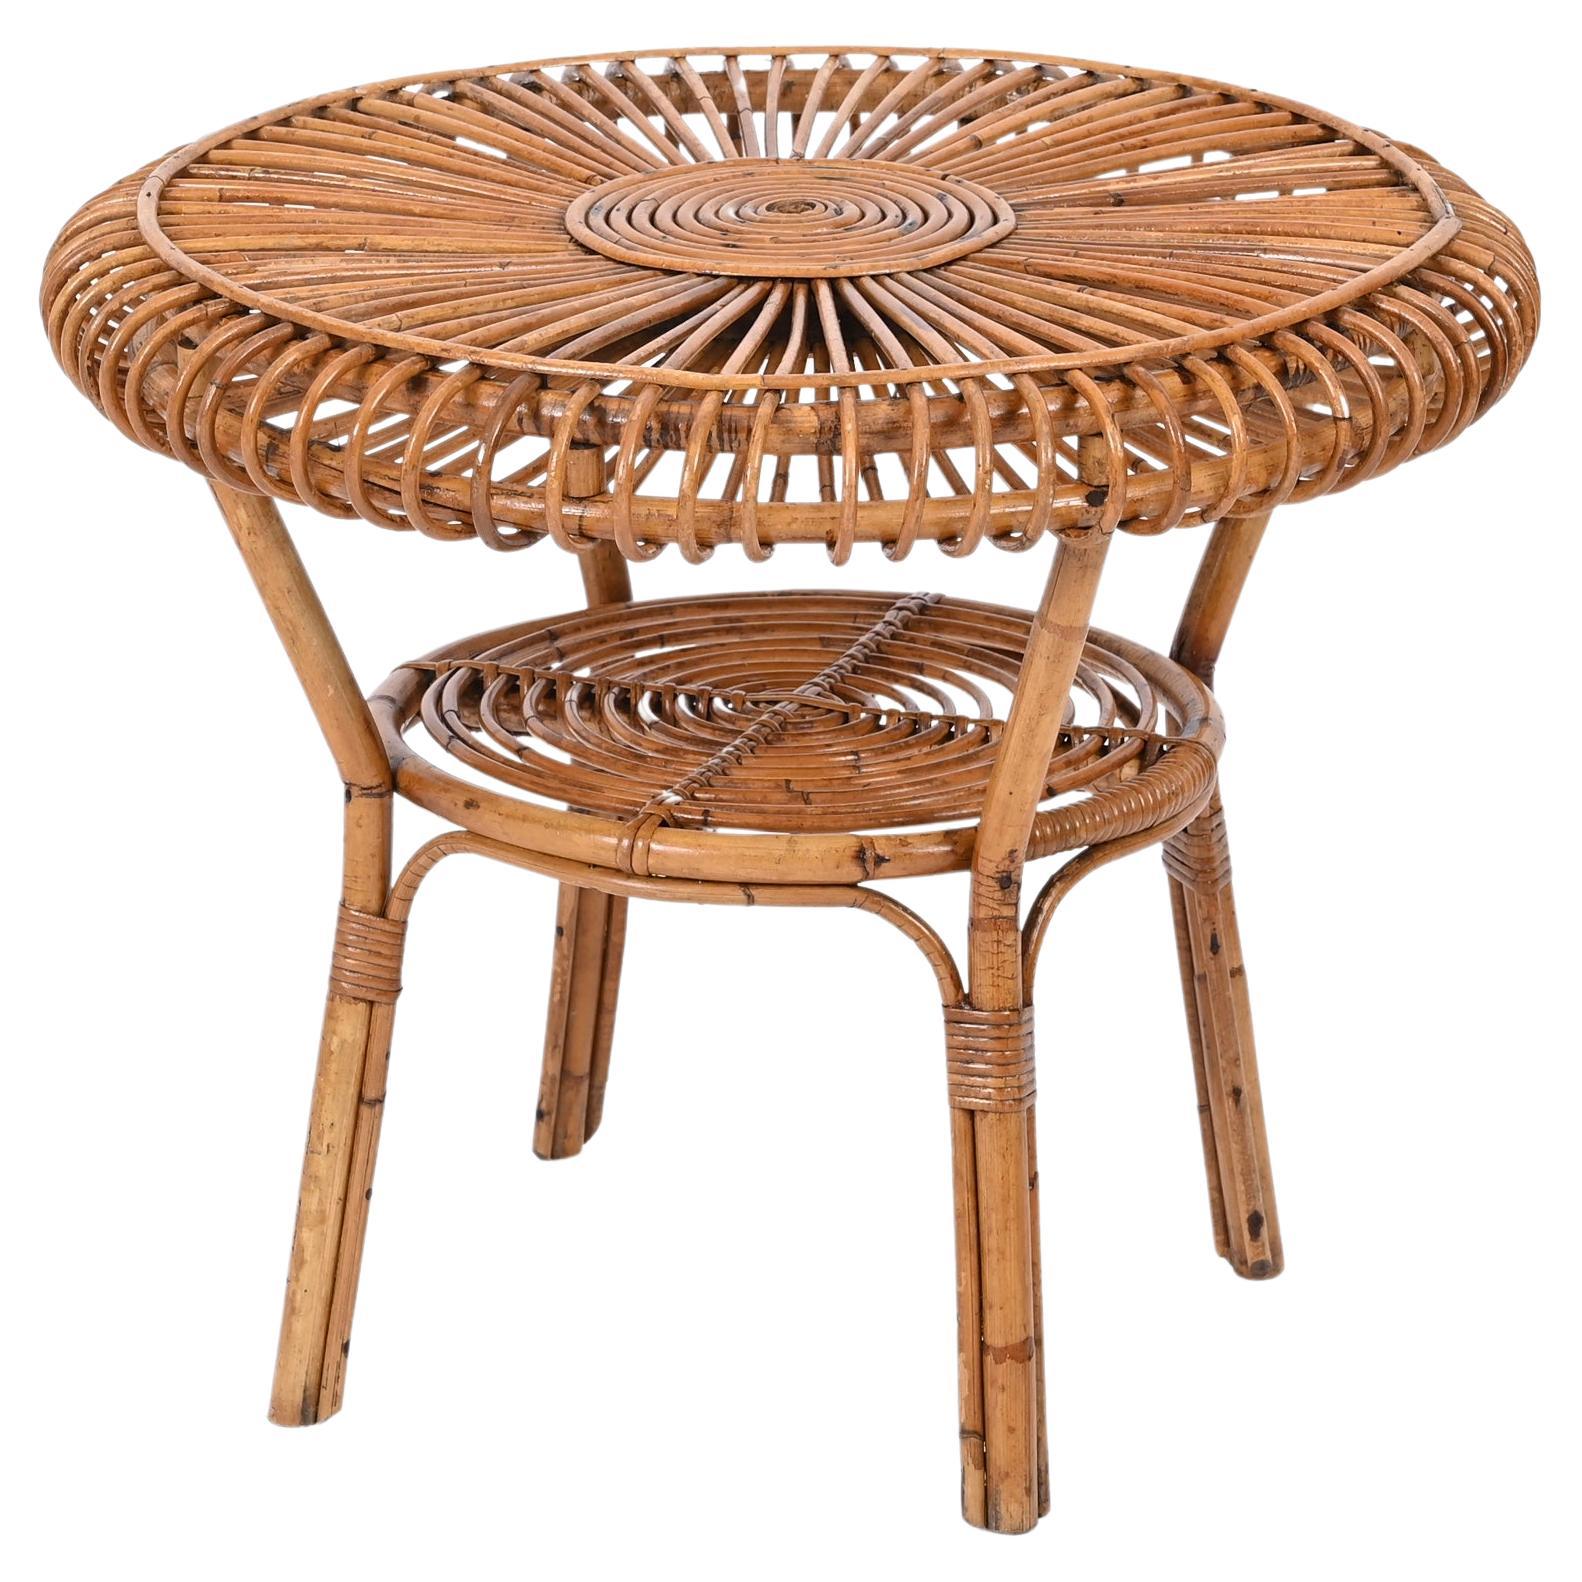 MidCentury Italian Round Coffee Table in Rattan and Bamboo, Italy 1960s